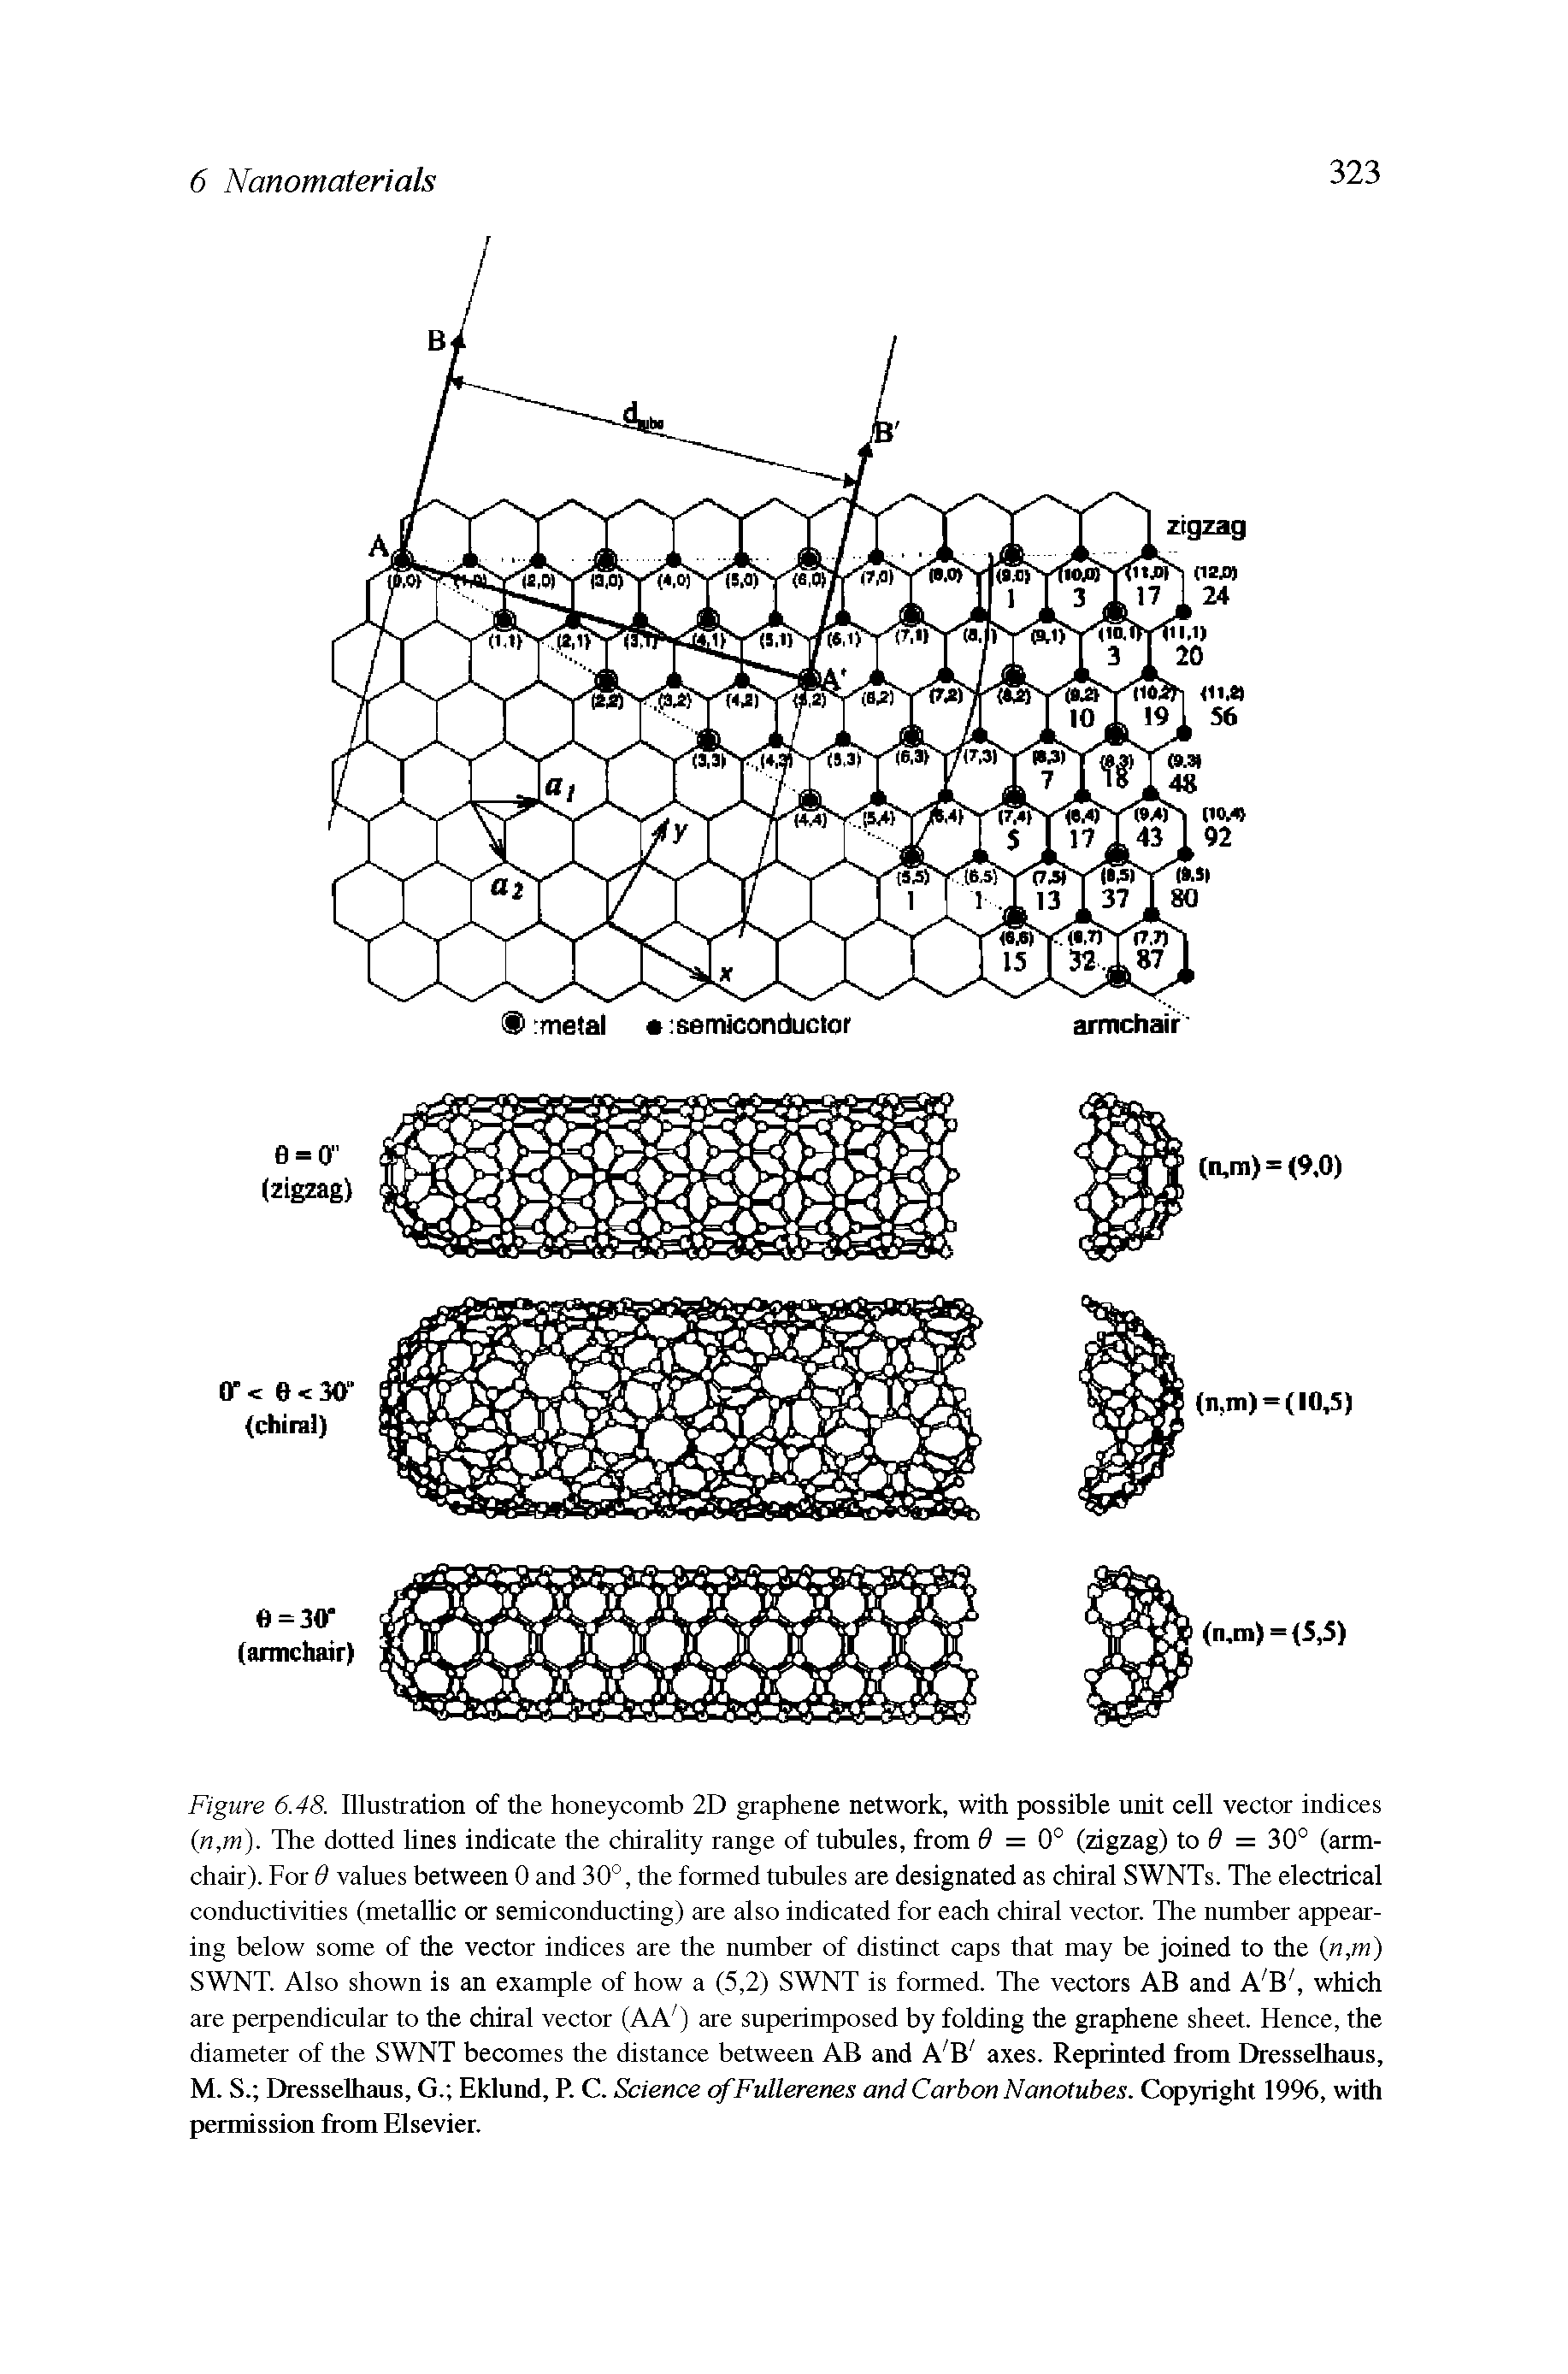 Figure 6.48. Illustration of the honeycomb 2D graphene network, with possible unit cell vector indices n,m). The dotted lines indicate the chirality range of tubules, from 0 = 0 (zigzag) to = 30° (armchair). For 0 values between 0 and 30°, the formed tubules are designated as chiral SWNTs. The electrical conductivities (metallic or semiconducting) are also indicated for each chiral vector. The number appearing below some of the vector indices are the number of distinct caps that may be joined to the n,m) SWNT. Also shown is an example of how a (5,2) SWNT is formed. The vectors AB and A B which are perpendicular to the chiral vector (AA are superimposed by folding the graphene sheet. Hence, the diameter of the SWNT becomes the distance between AB and A B axes. Reprinted from Dresselhaus, M. S. Dresselhaus, G. Eklund, R C. Science ofFullerenes and Carbon Nanotubes. Copyright 1996, with permission from Elsevier.